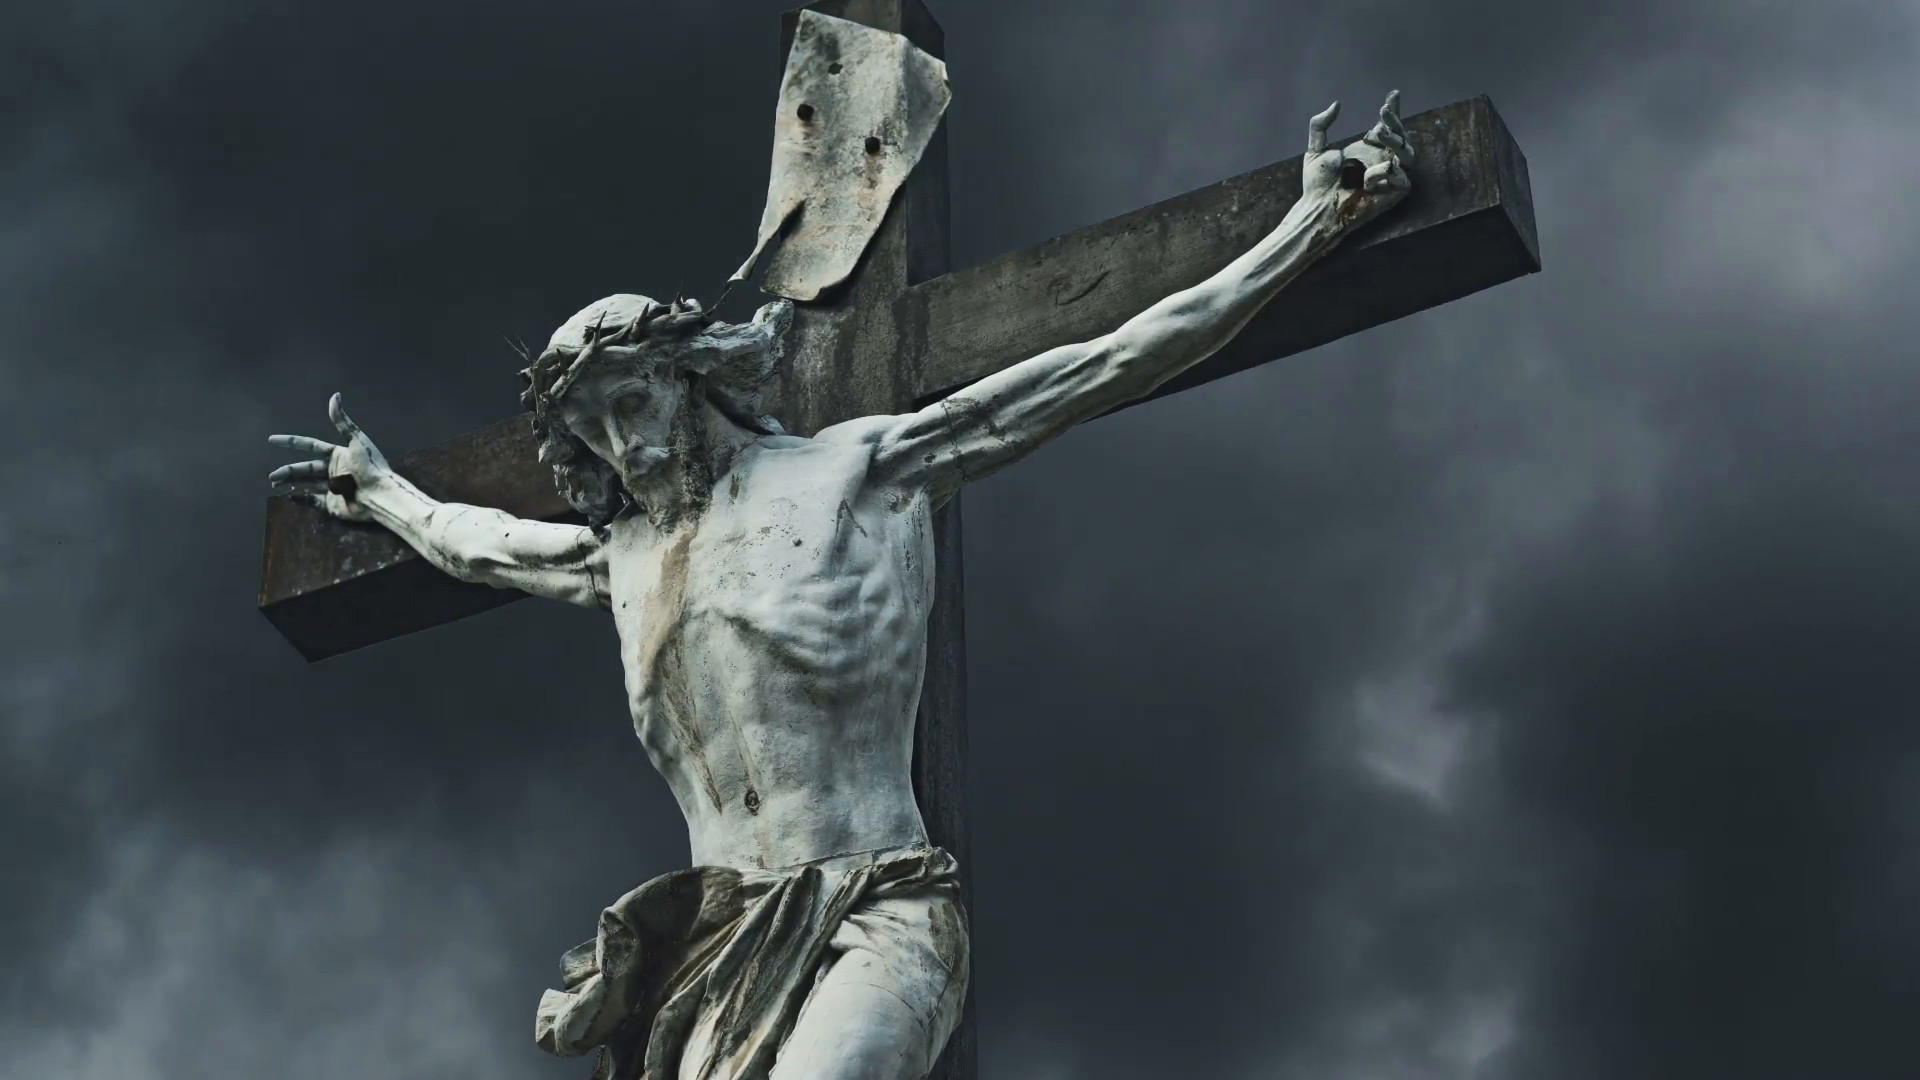 1920x1080 Crucifixion. Christian cross with Jesus Christ statue over stormy clouds  time lapse. , 1080p, hd format Stock Video Footage - VideoBlocks